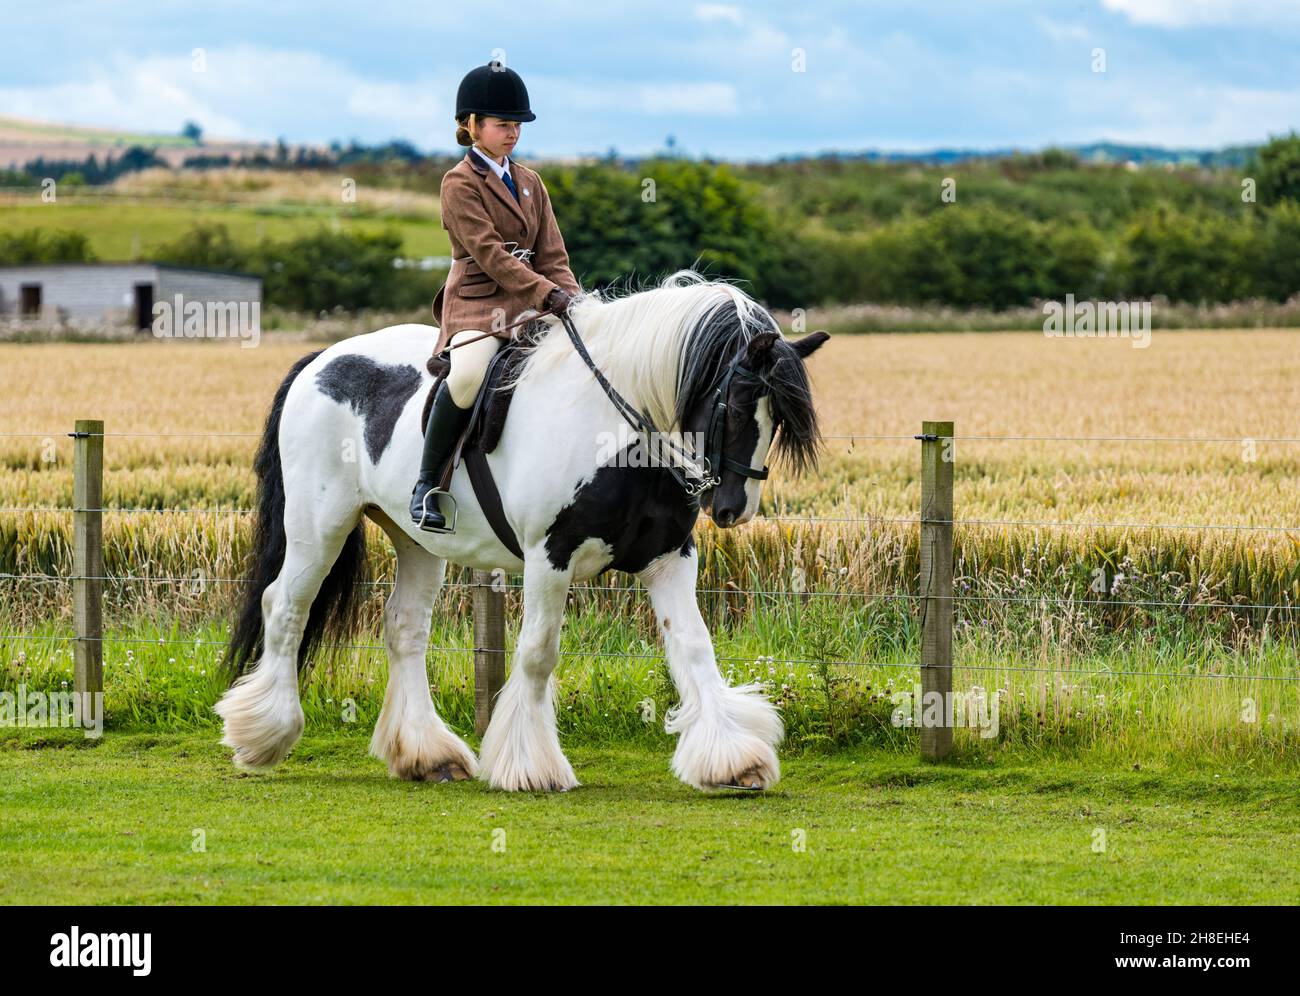 Girl riding horse in field at outdoor Summer horse event, East Lothian, Scotland, UK Stock Photo